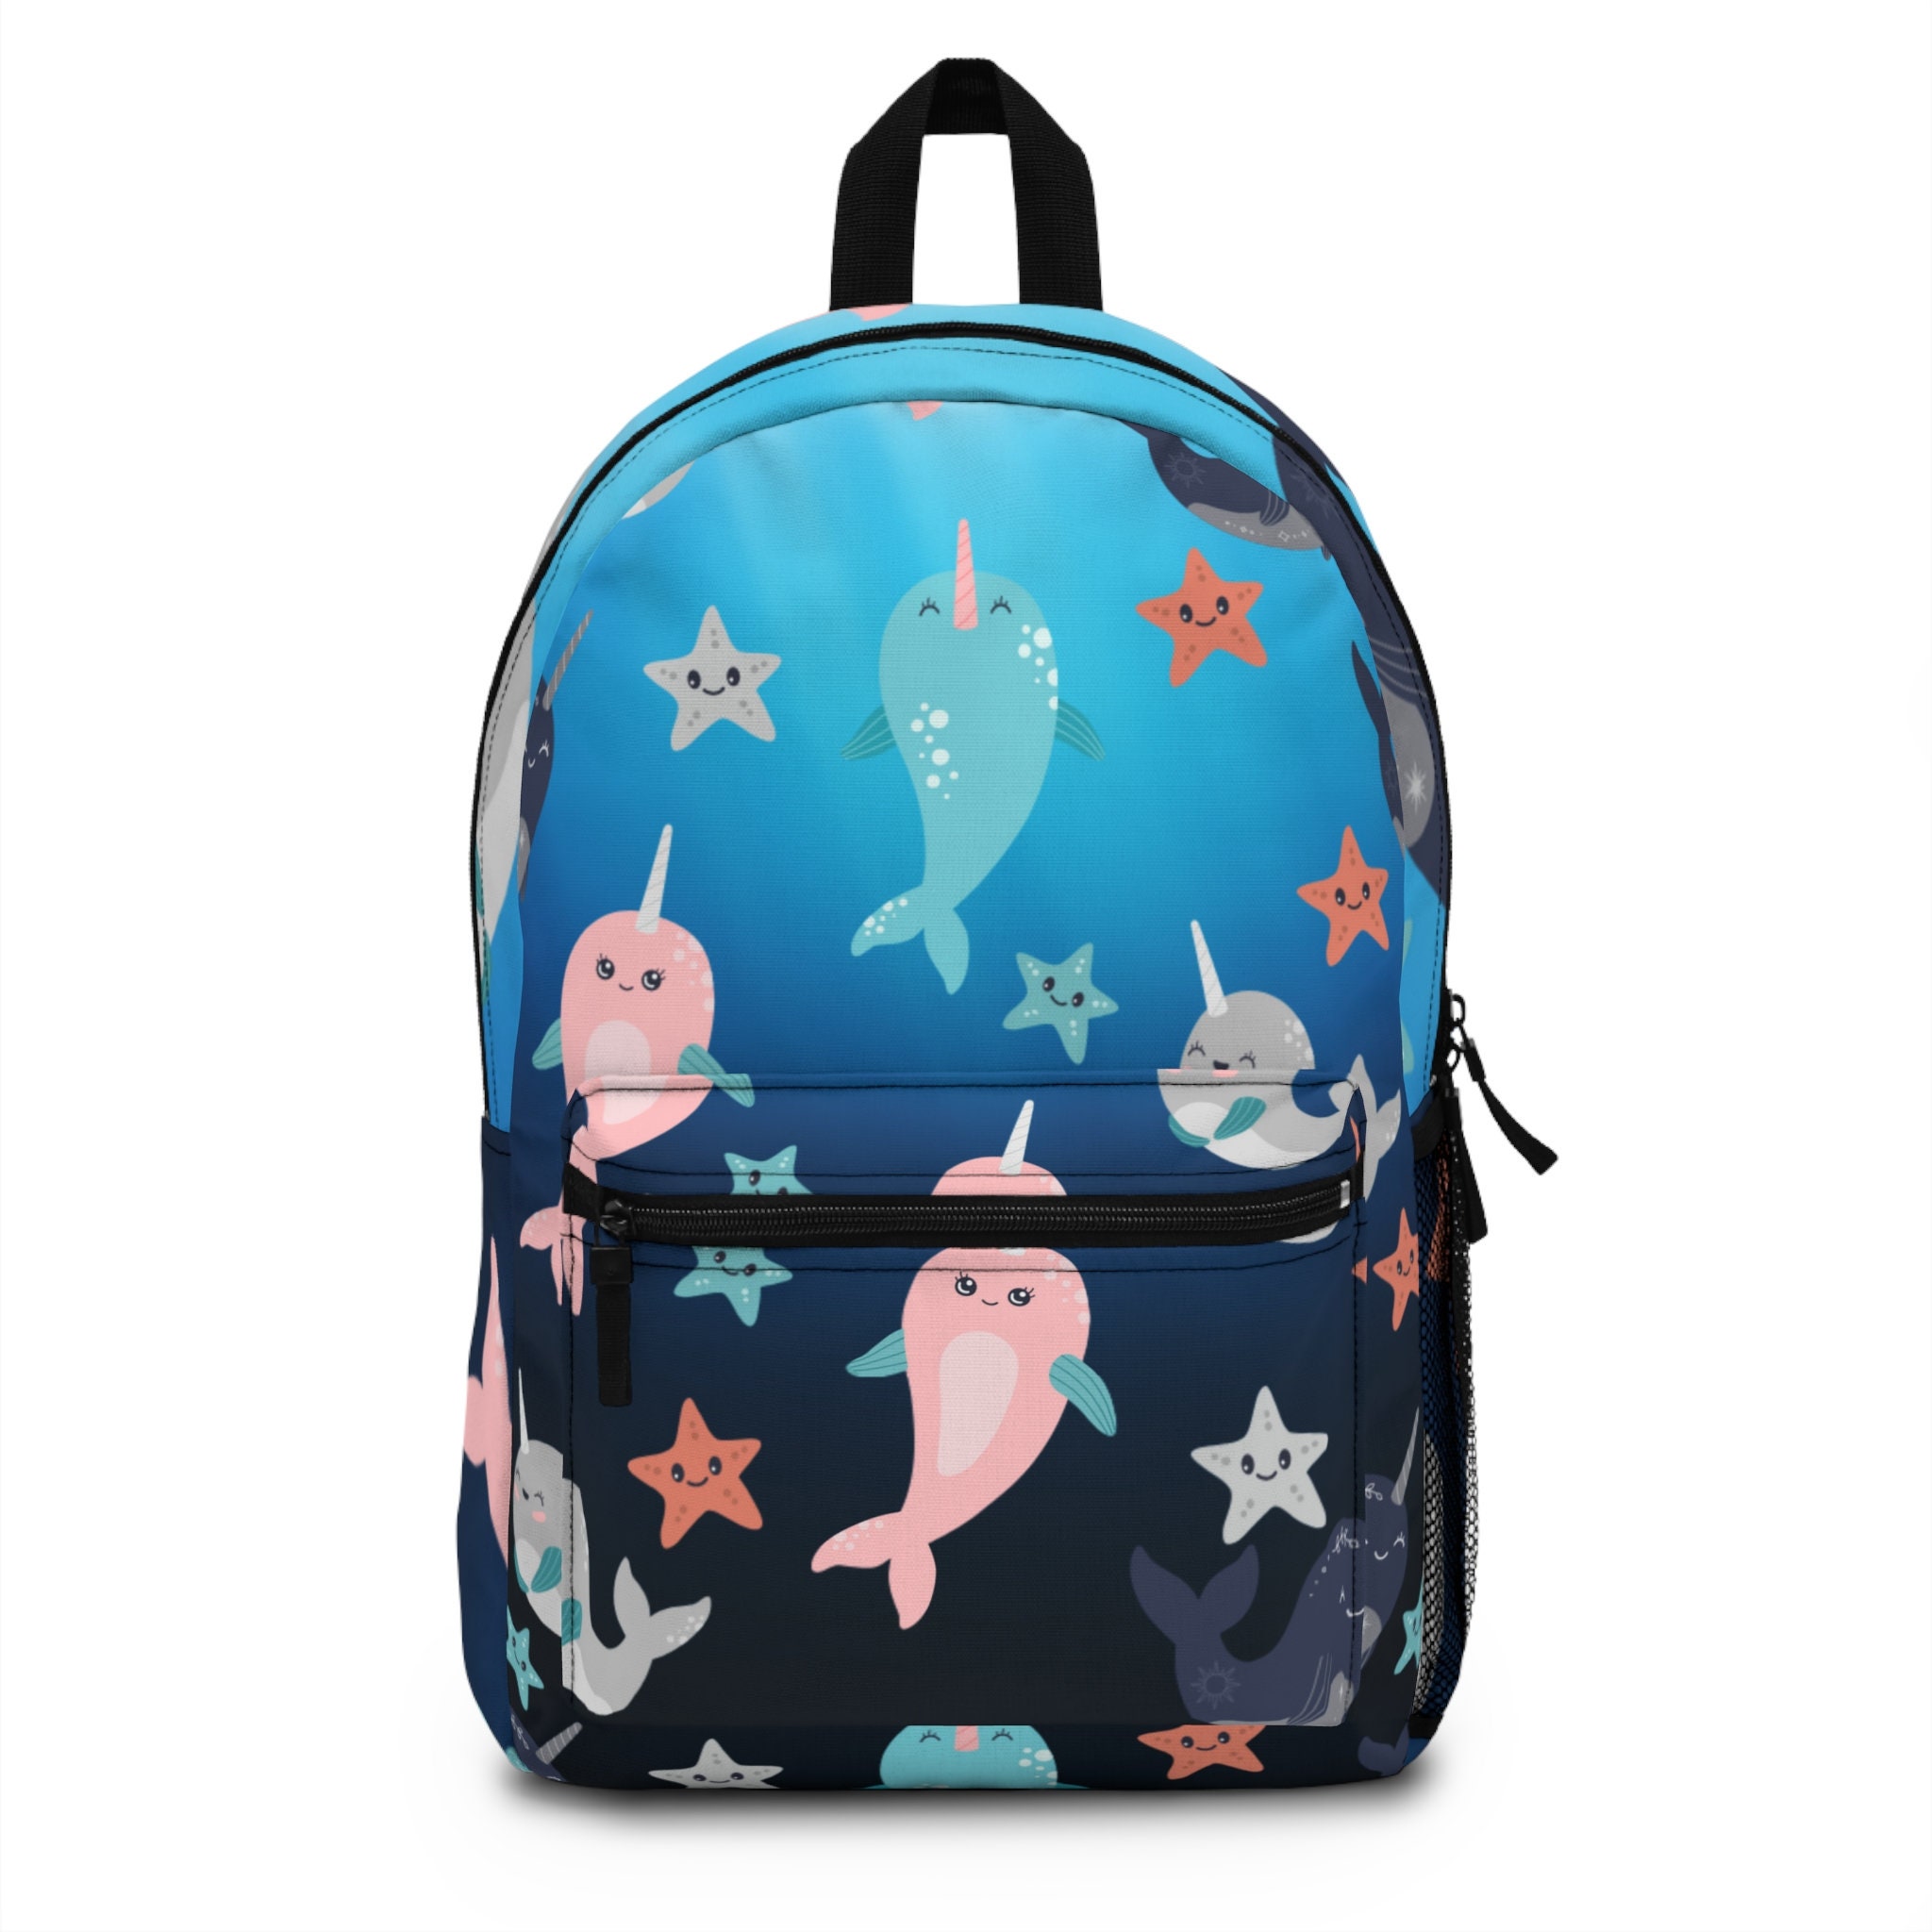 Brielle Convertible Bag – Narwhal Gifts